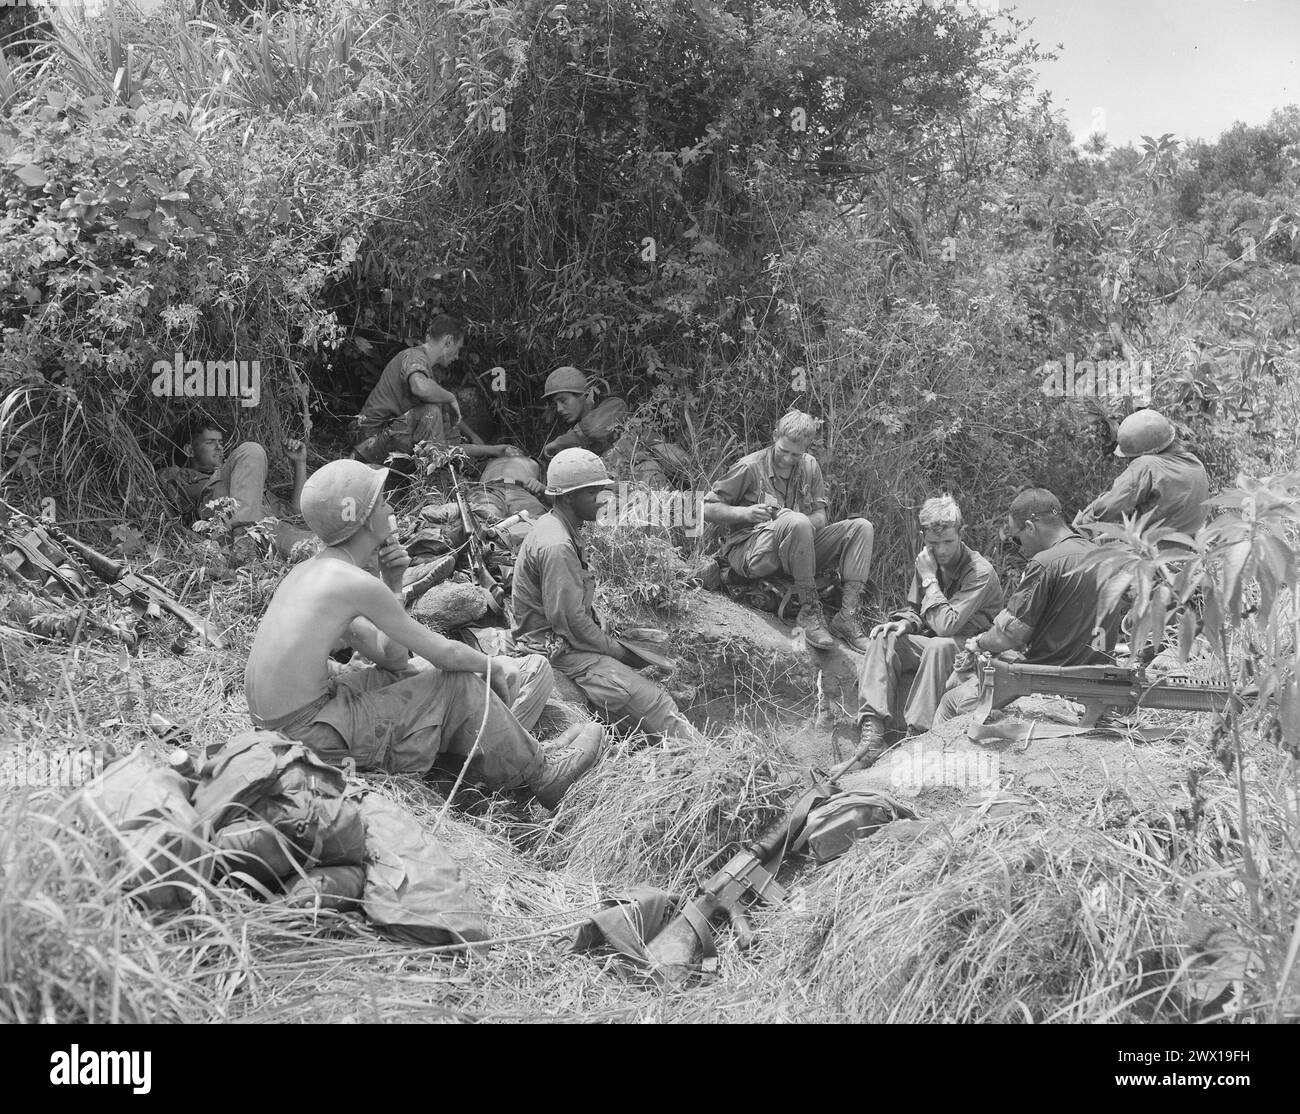 Vietnam War: Members of Companies B and D, 1st Battalion, 501st Infantry, Regiment, 101st Airborne Division, take a break from jungle fighting east of Tam Ky ca. 1969 Stock Photo